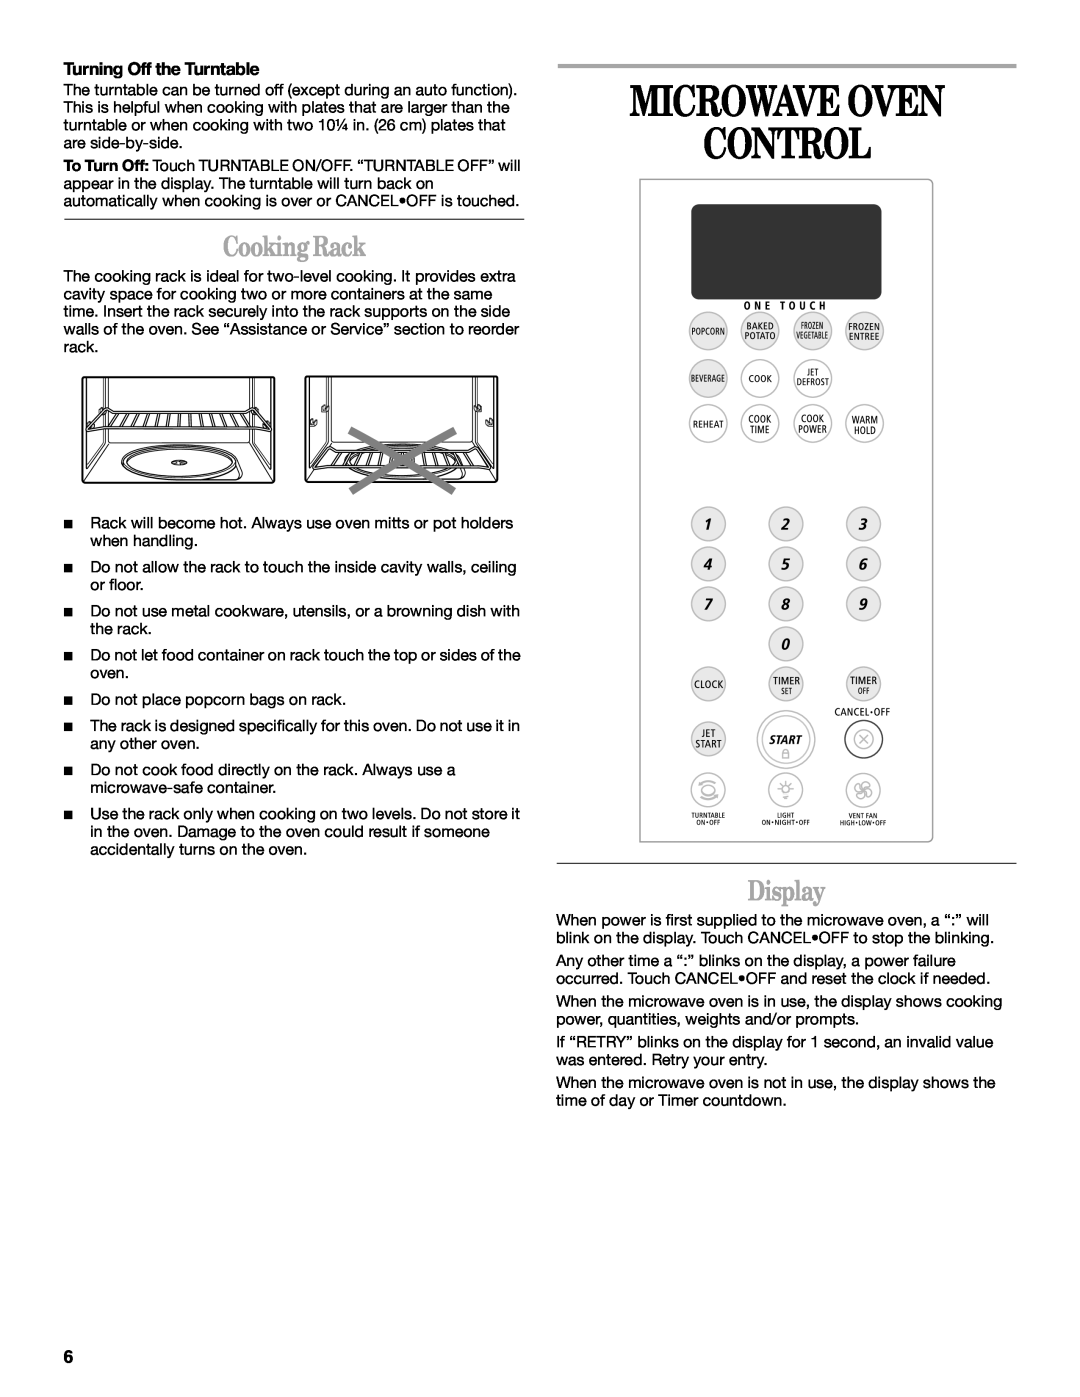 Whirlpool MH8150XM manual Microwave Oven Control, Cooking Rack, Display 